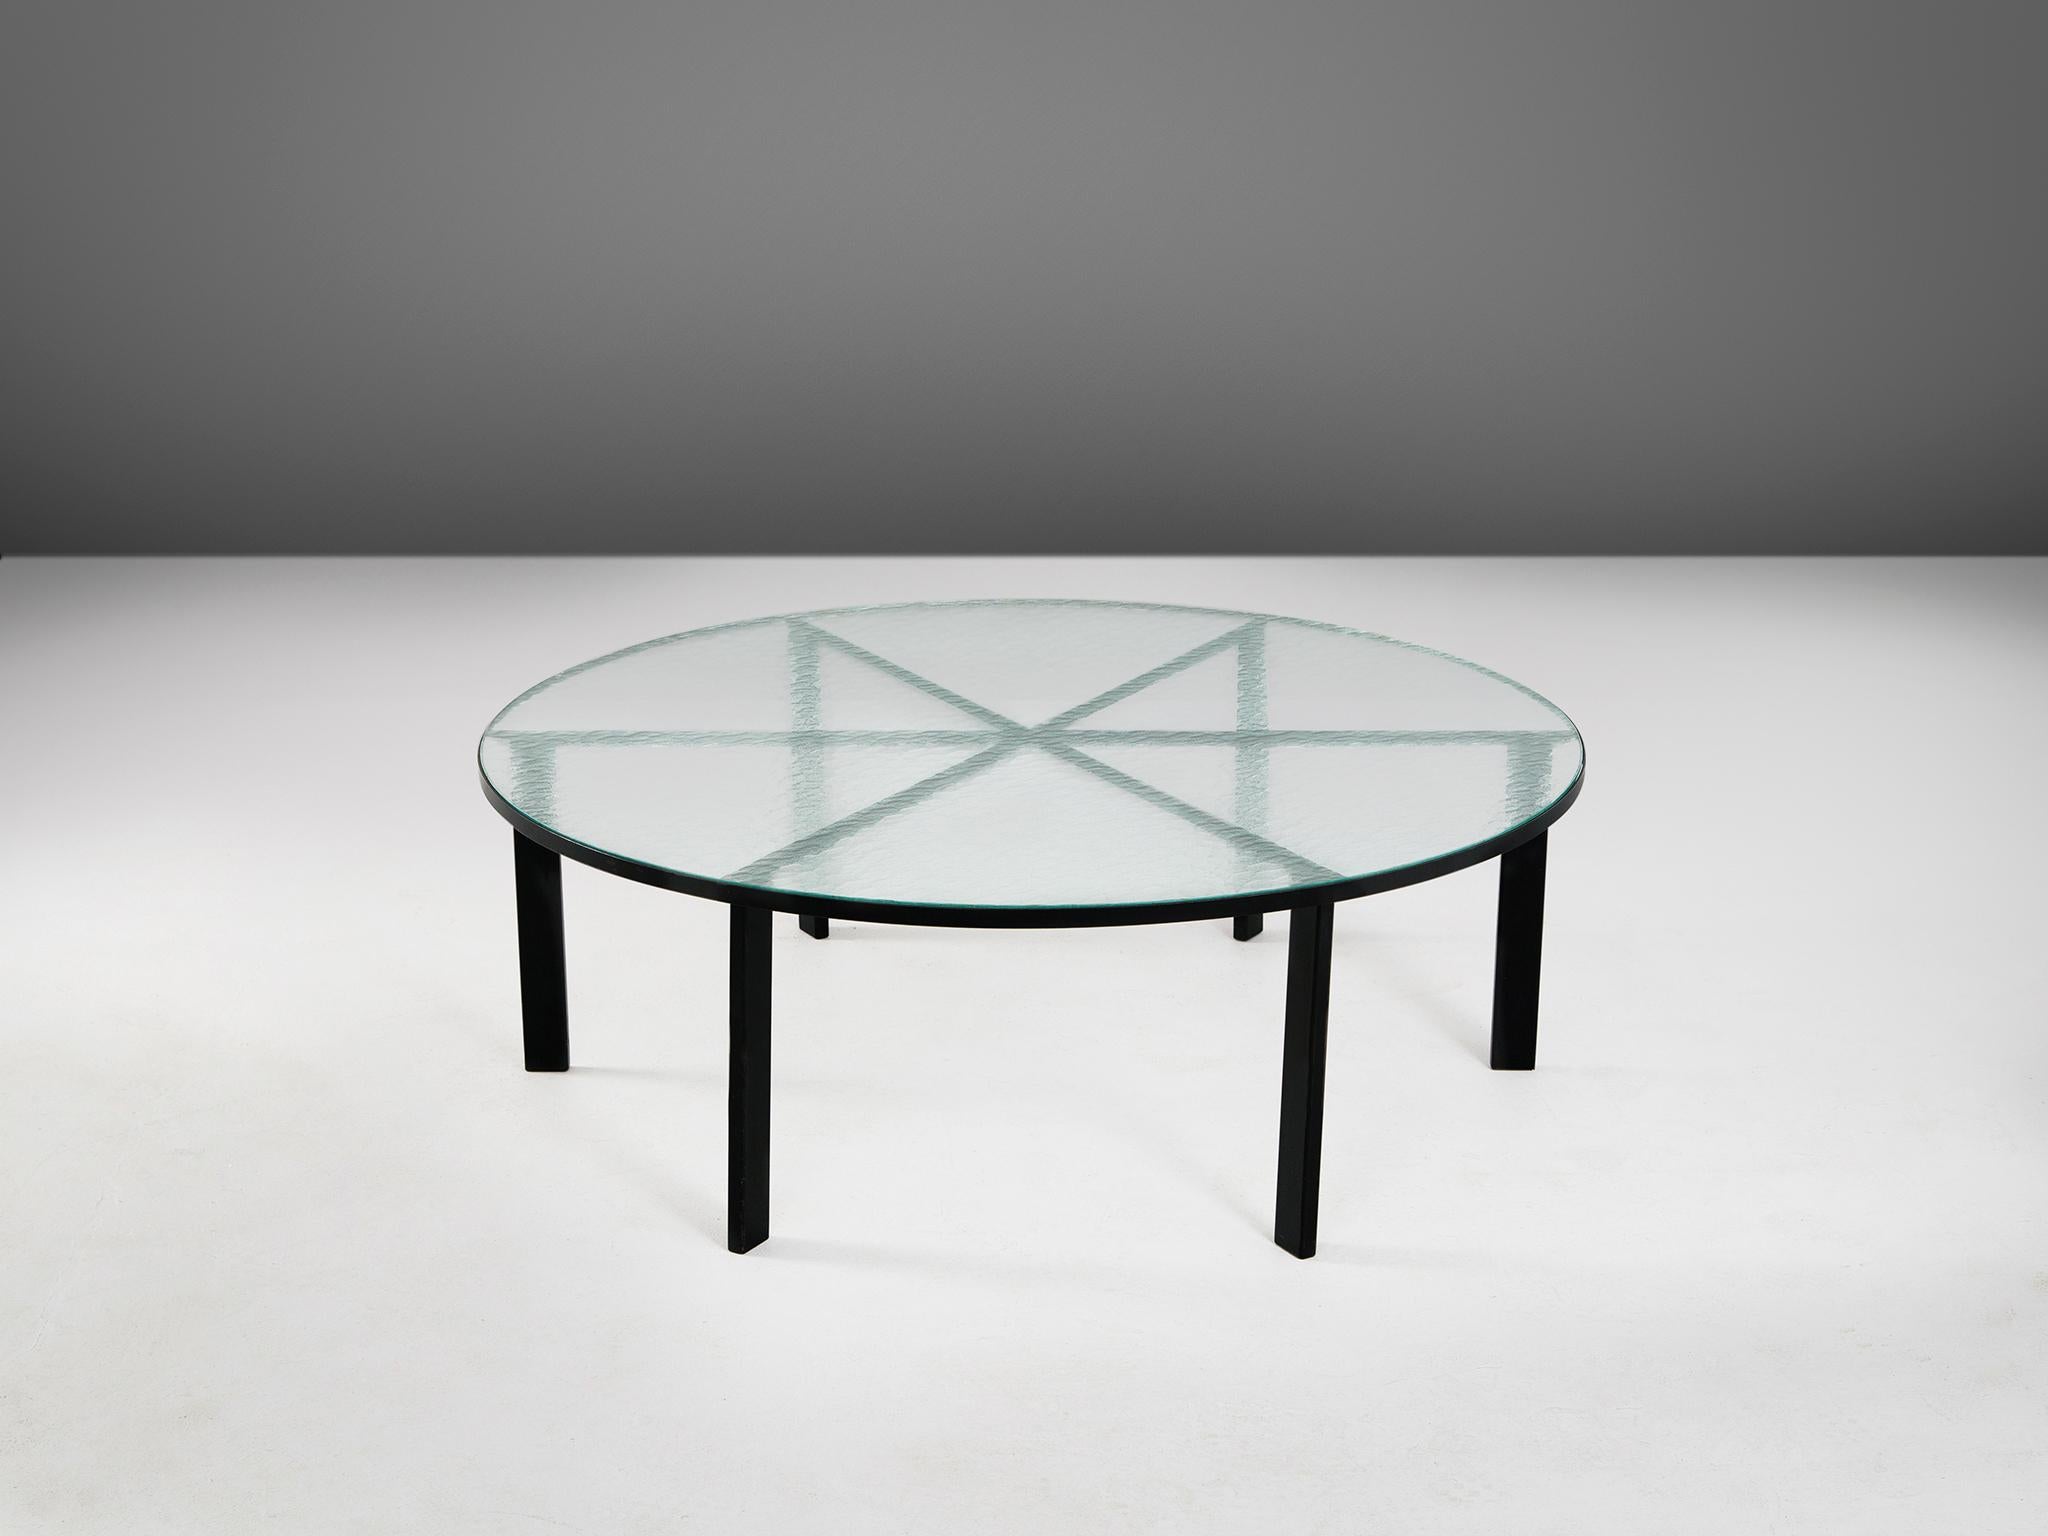 Janni Van Pelt, coffee table, frosted glass and black coated metal, the Netherlands, 1950s

Dutch Modernist cocktail table by Janni Van Pelt. The table is produced by Bas Van Pelt and features a black coated squared tube frame. The six-legged frame